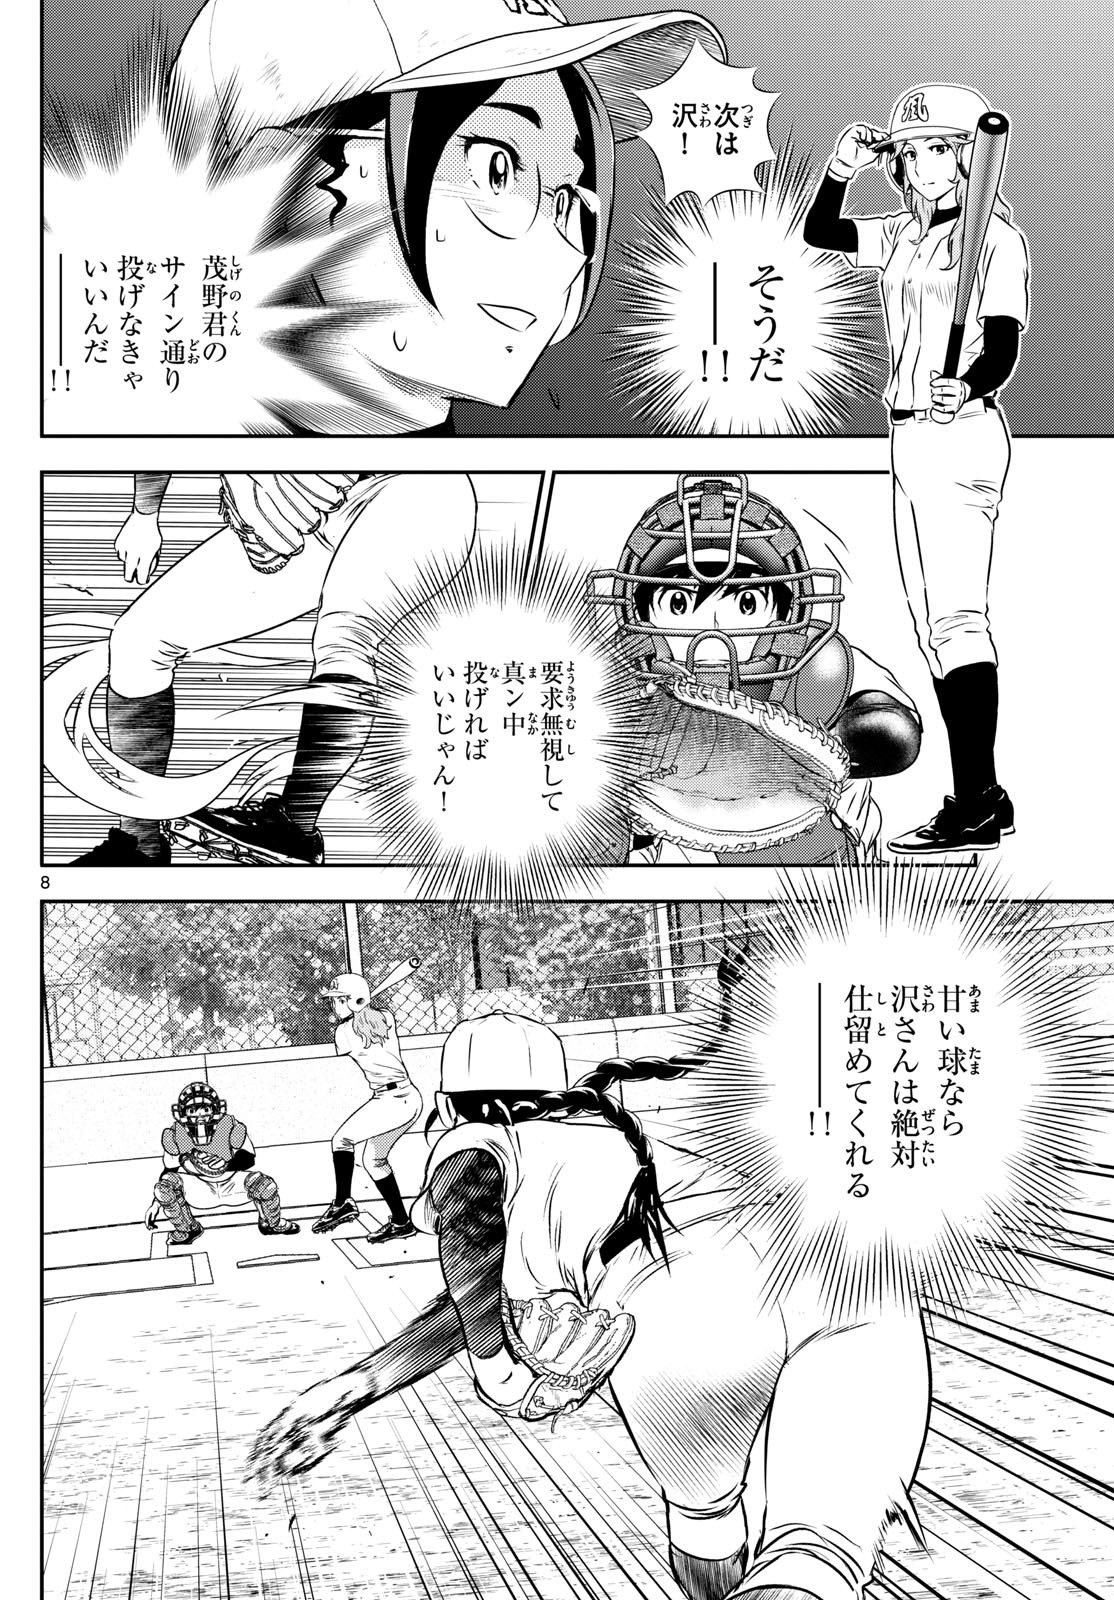 Major 2nd - メジャーセカンド - Chapter 280 - Page 8